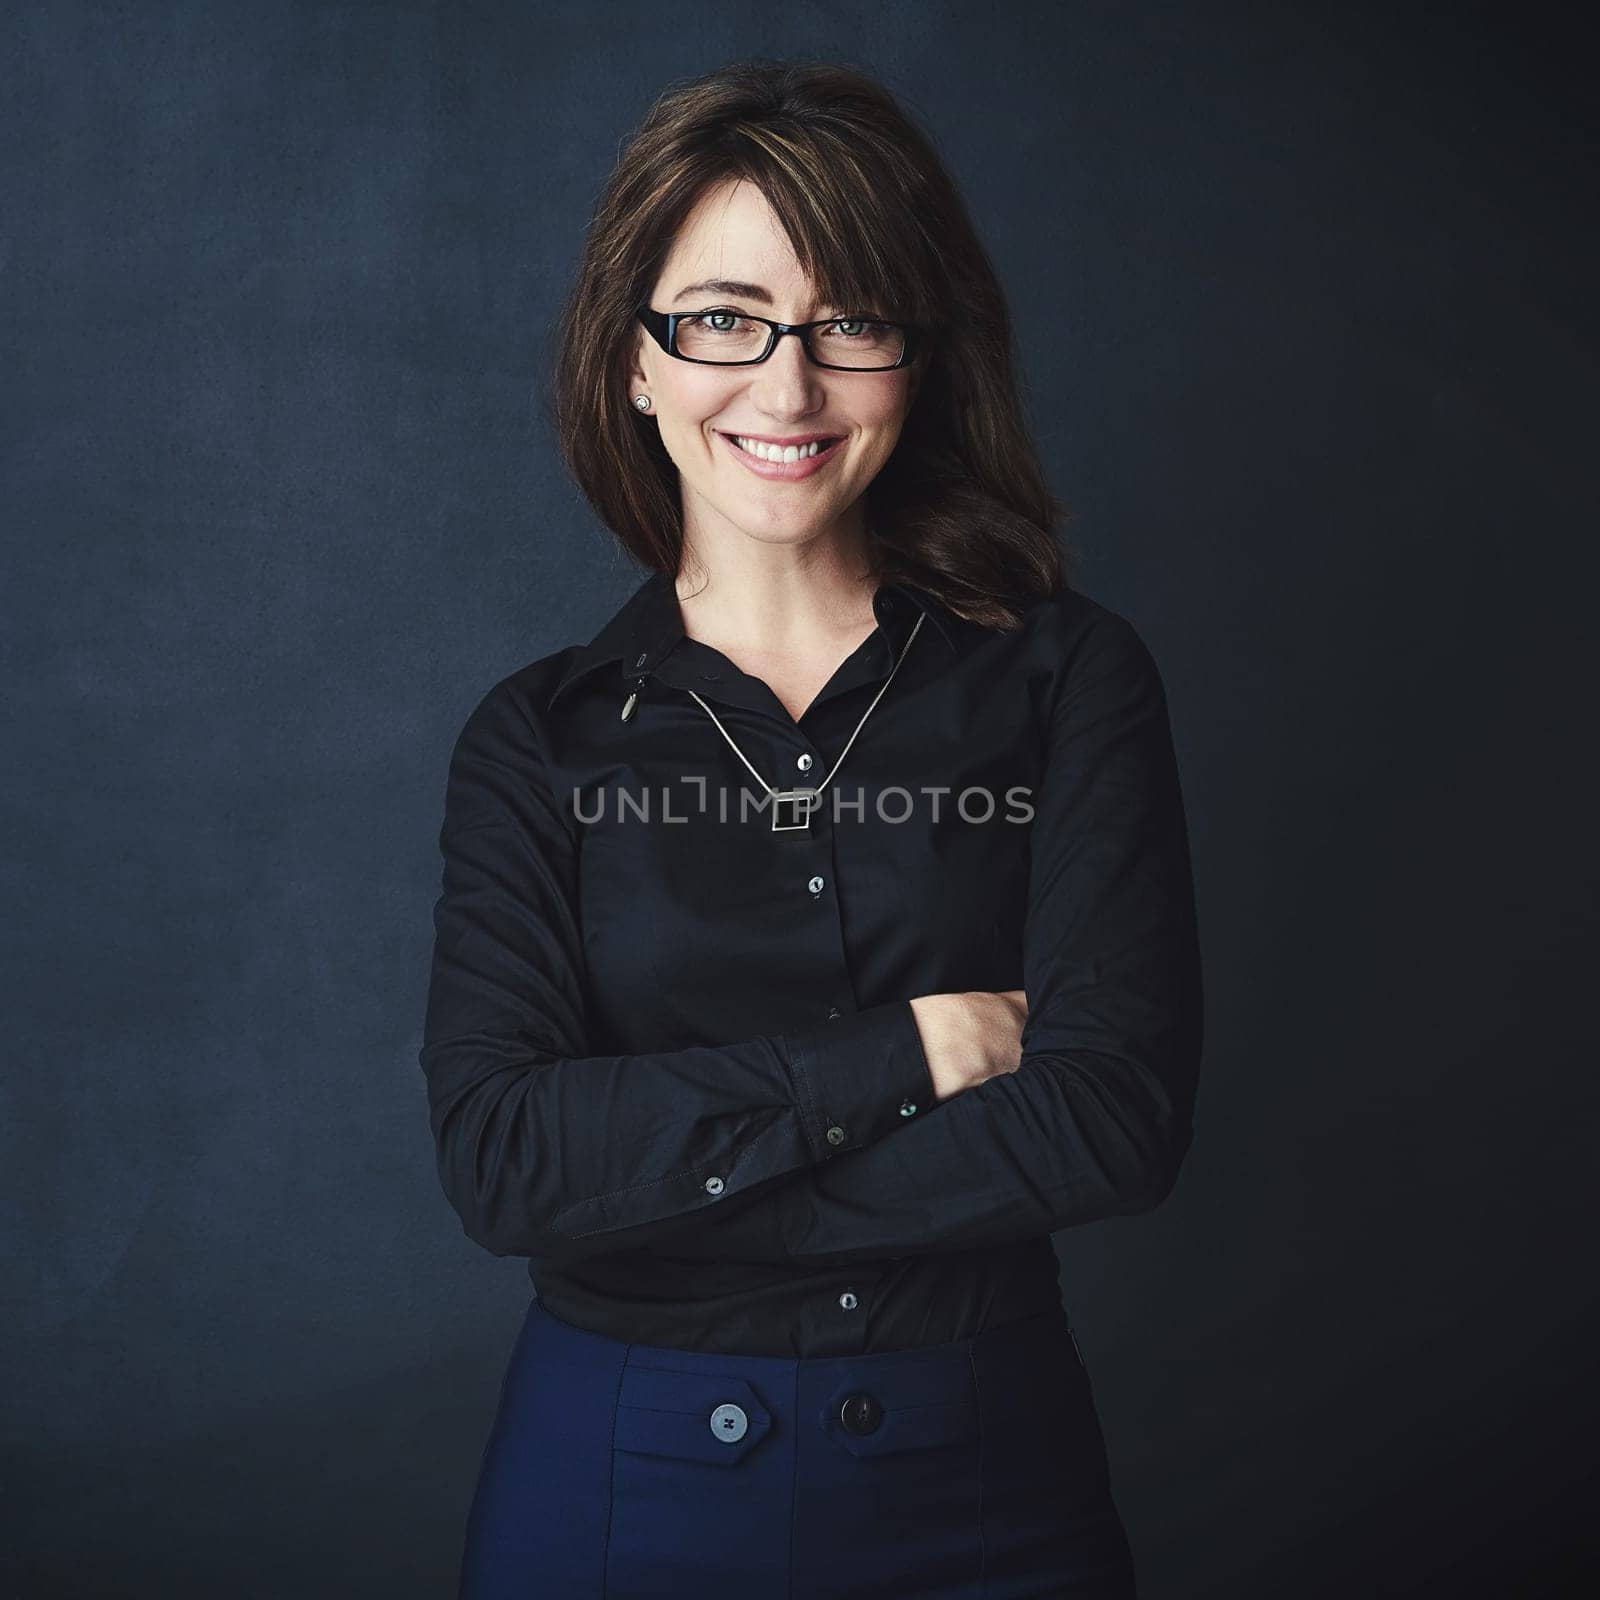 Success stems from confidence. Studio portrait of a corporate businesswoman posing against a dark background